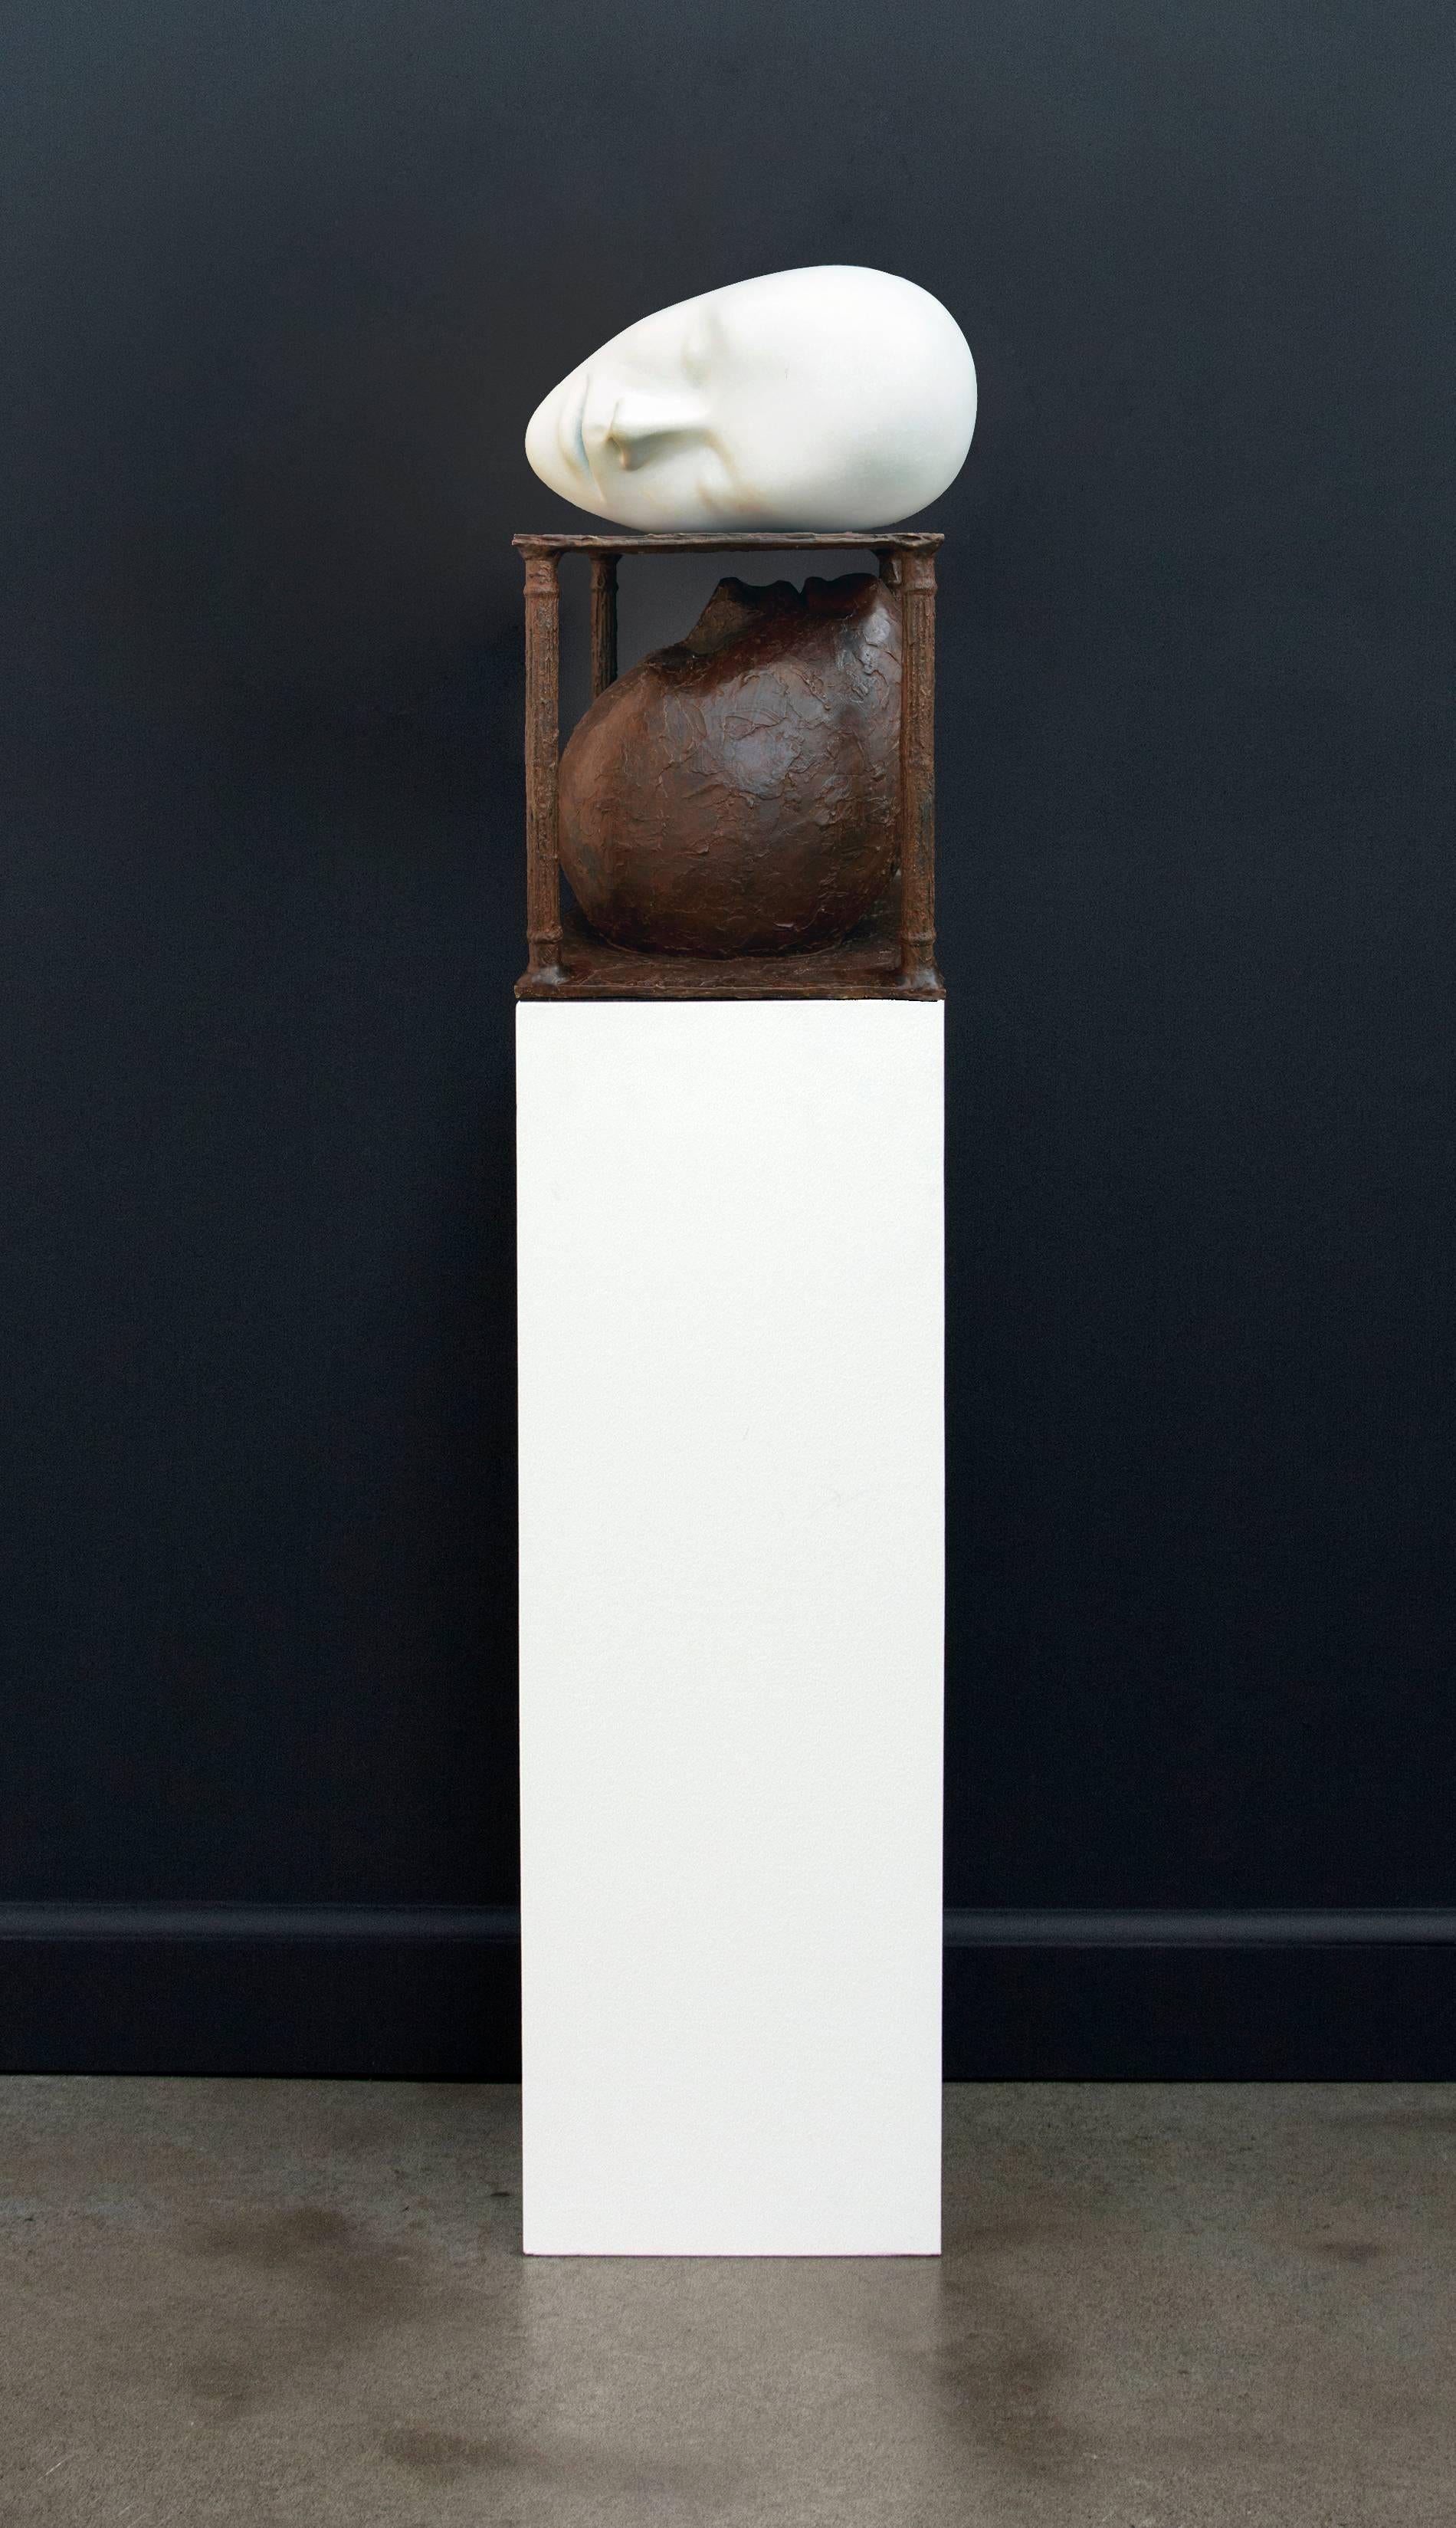 Whisper 3/7 - human face, narrative, patinated bronze figurative sculpture - Sculpture by Dale Dunning